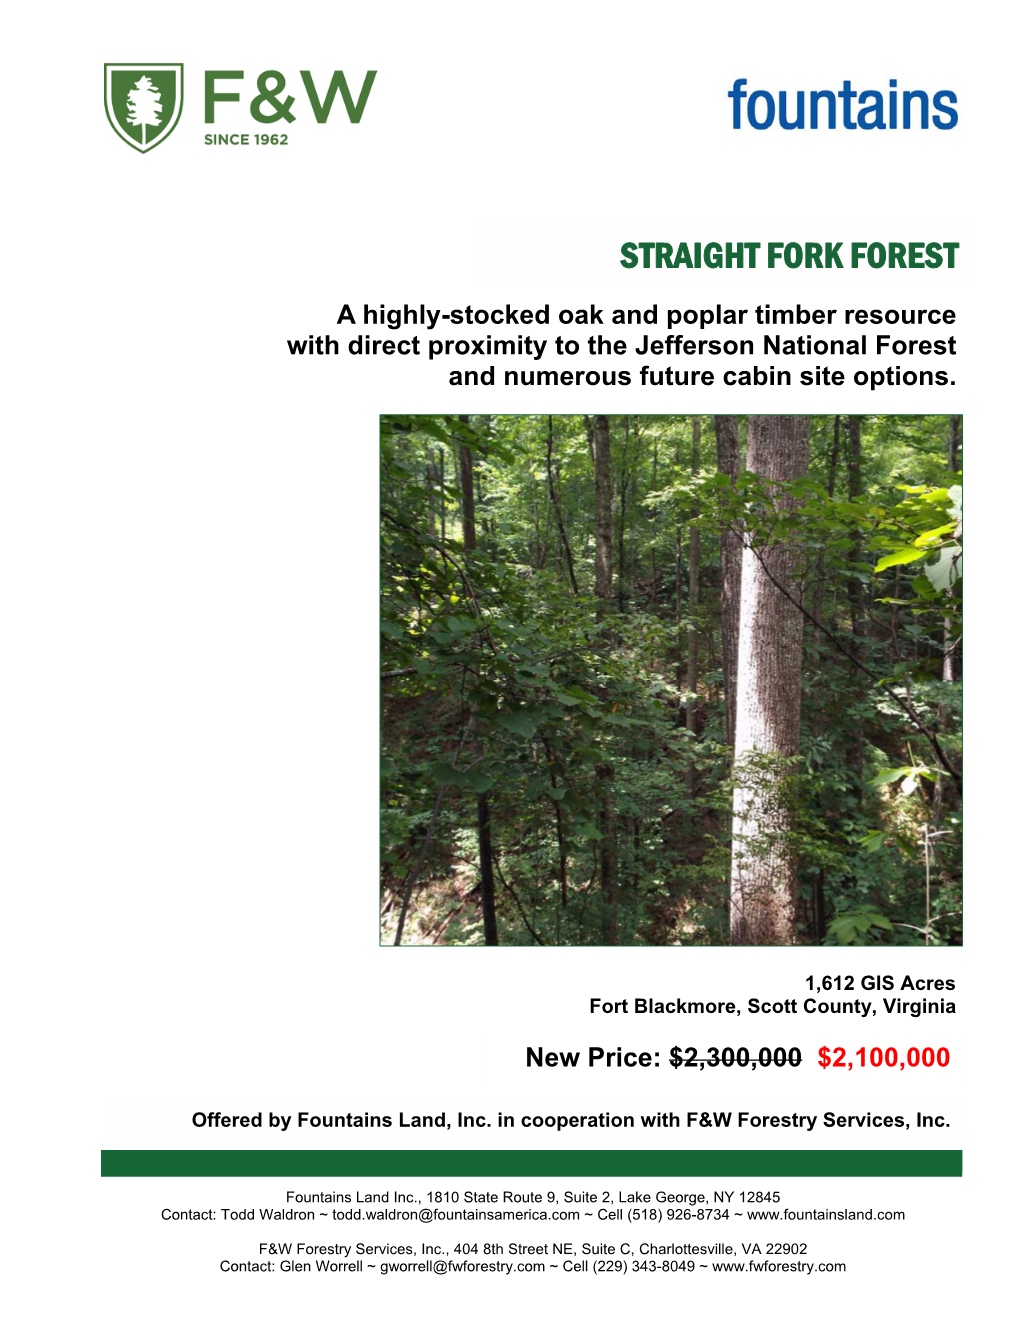 Straight Fork Forest